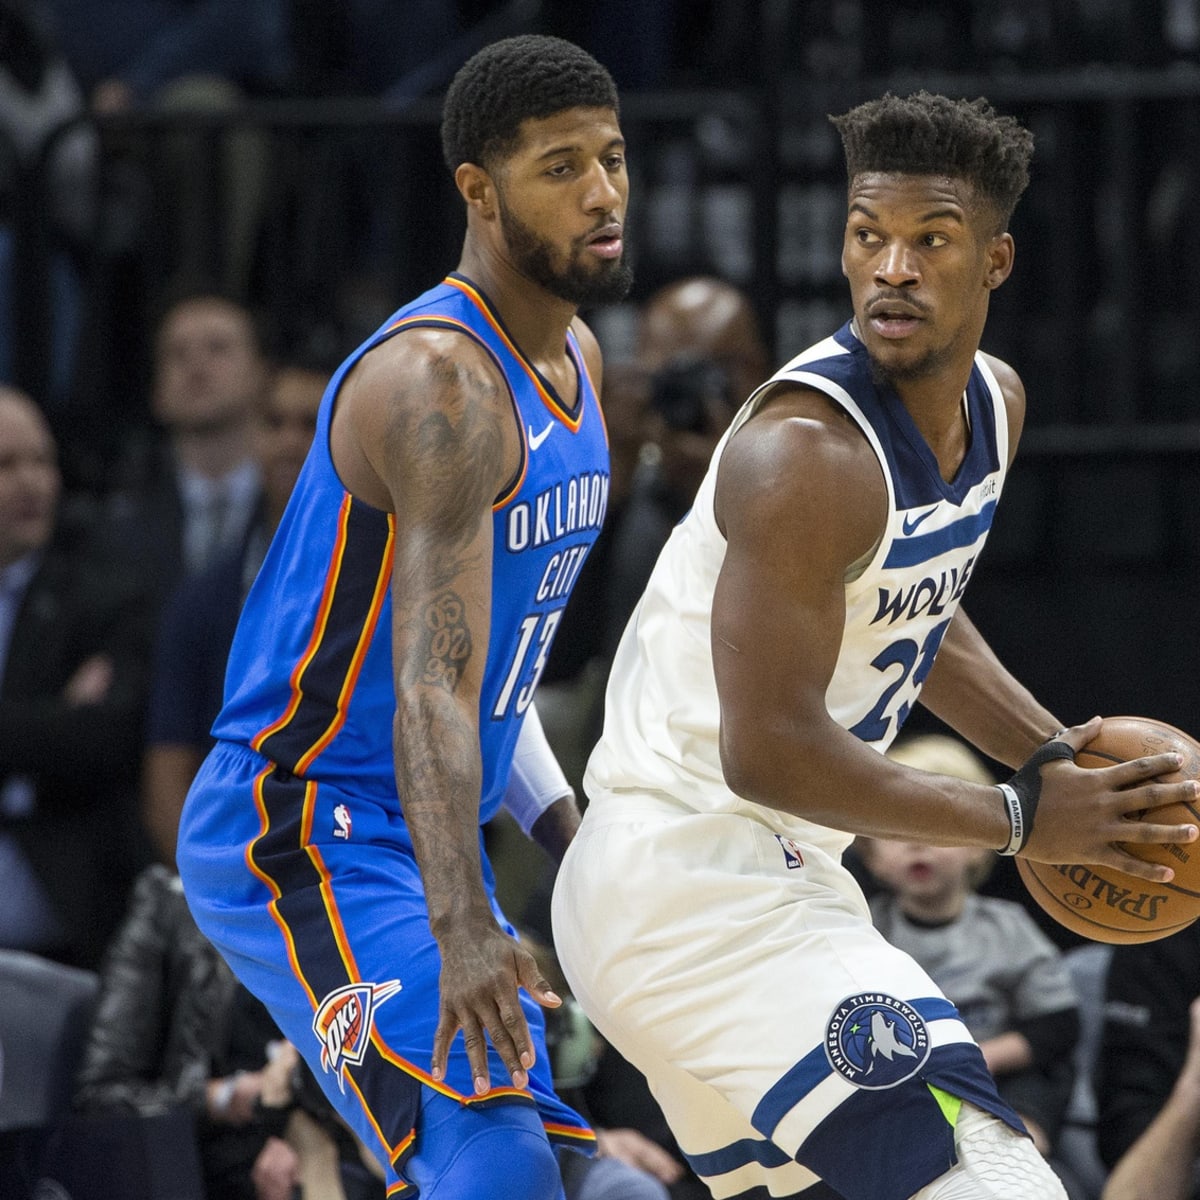 Jimmy Butler would have fit really well on the Indiana Pacers